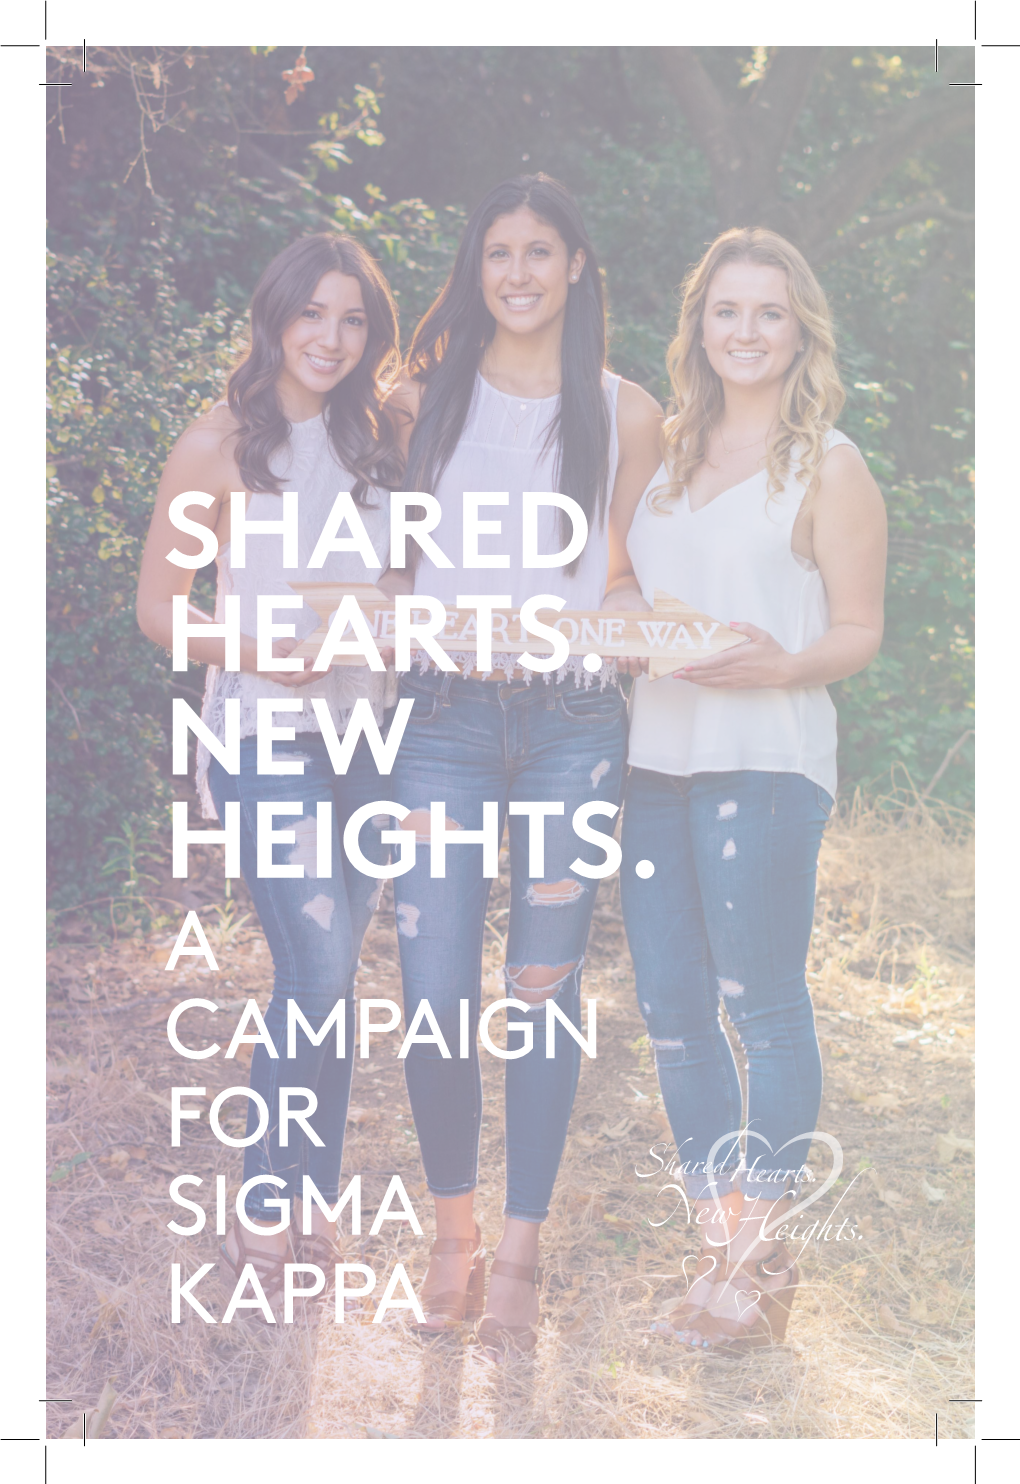 Shared Hearts. New Heights. a Campaign for Sigma Kappa